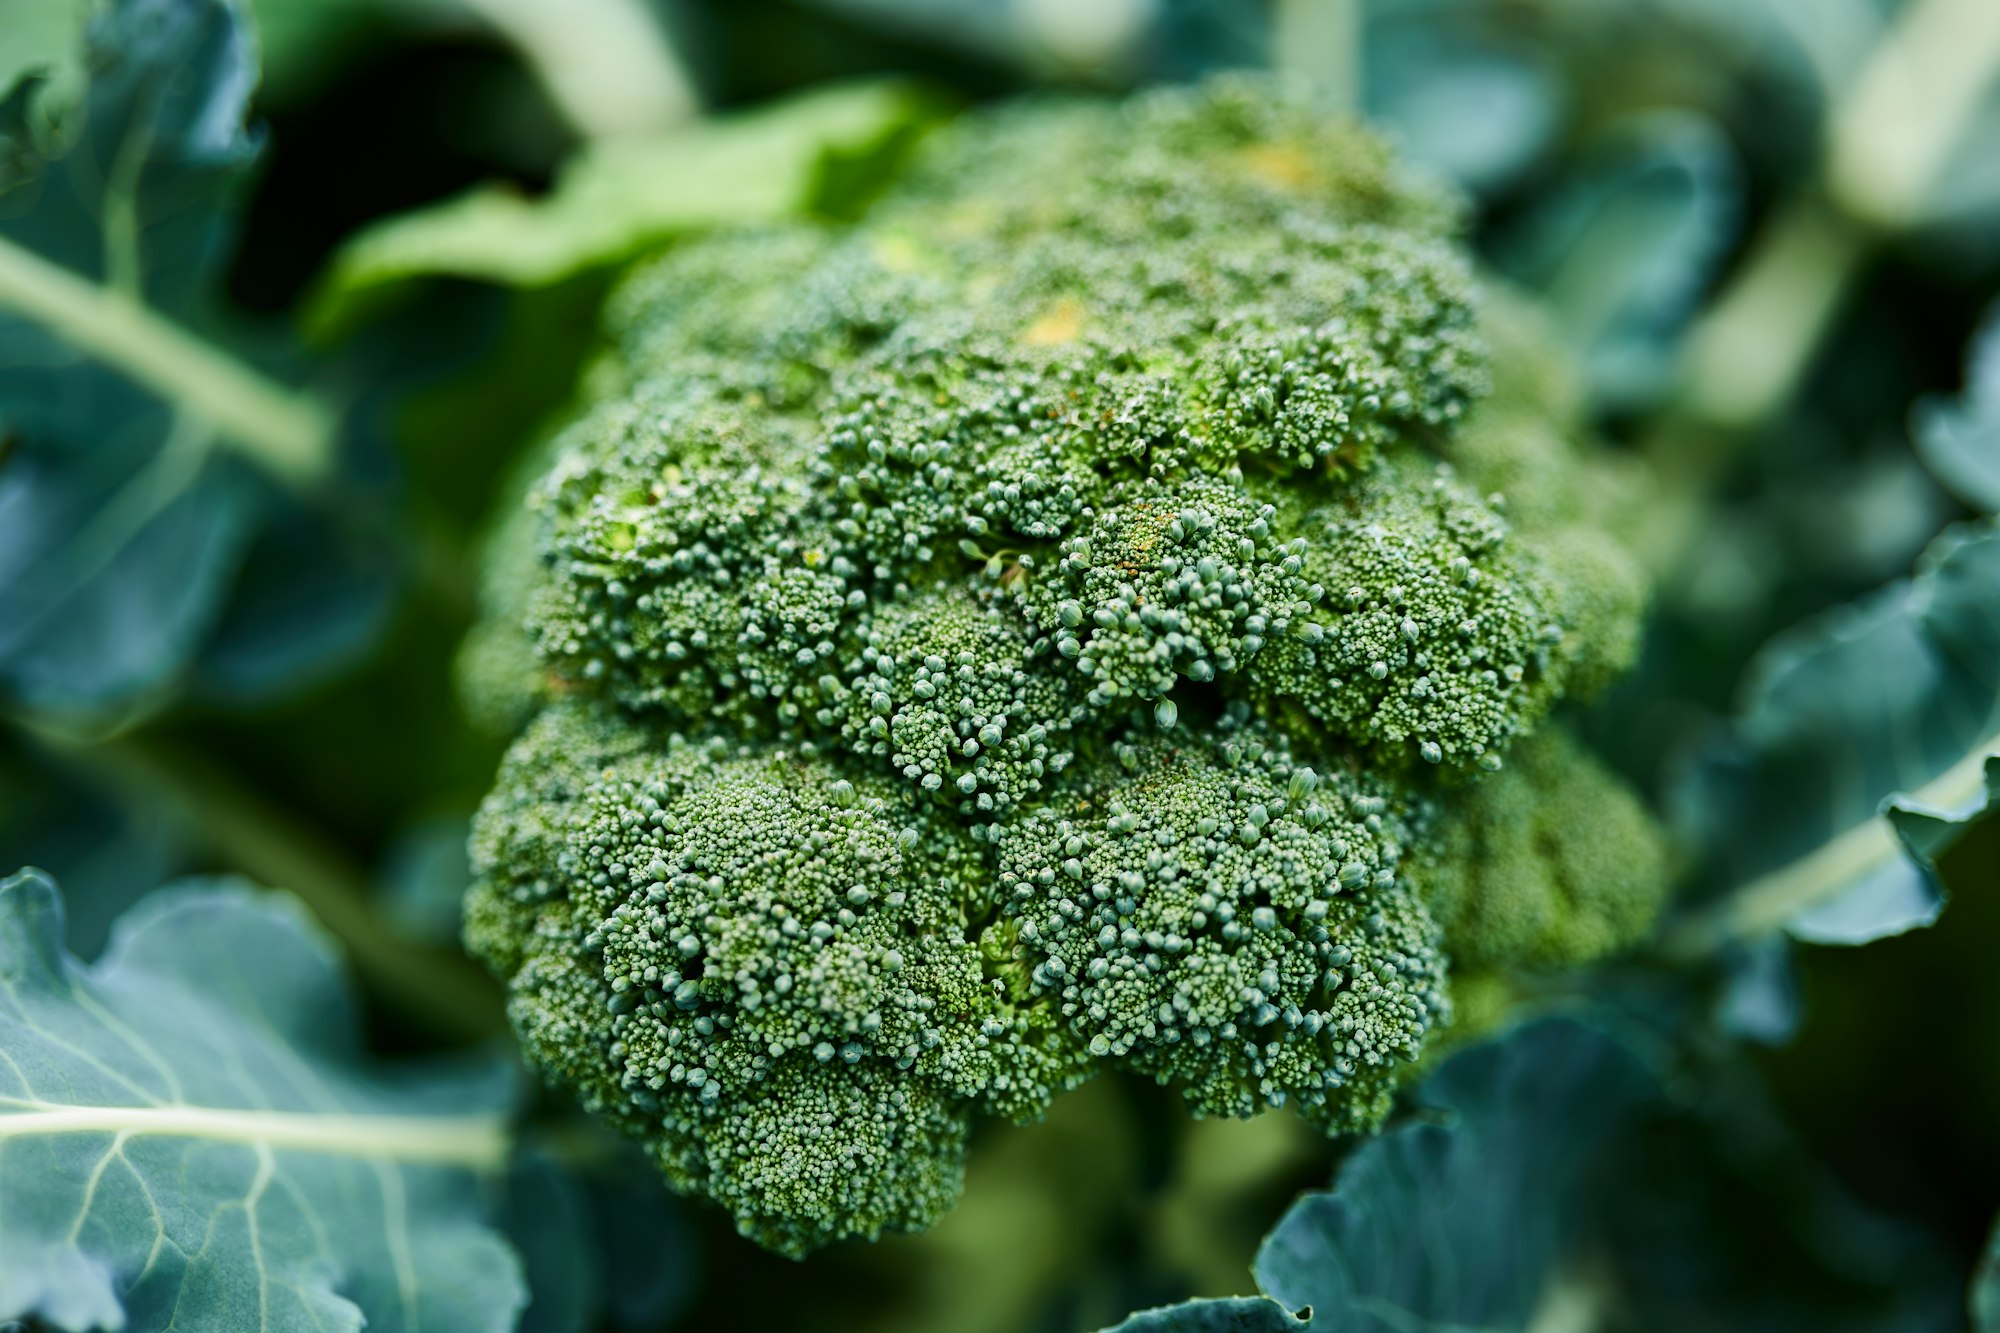 How to smoothly digest broccoli, garlic and more